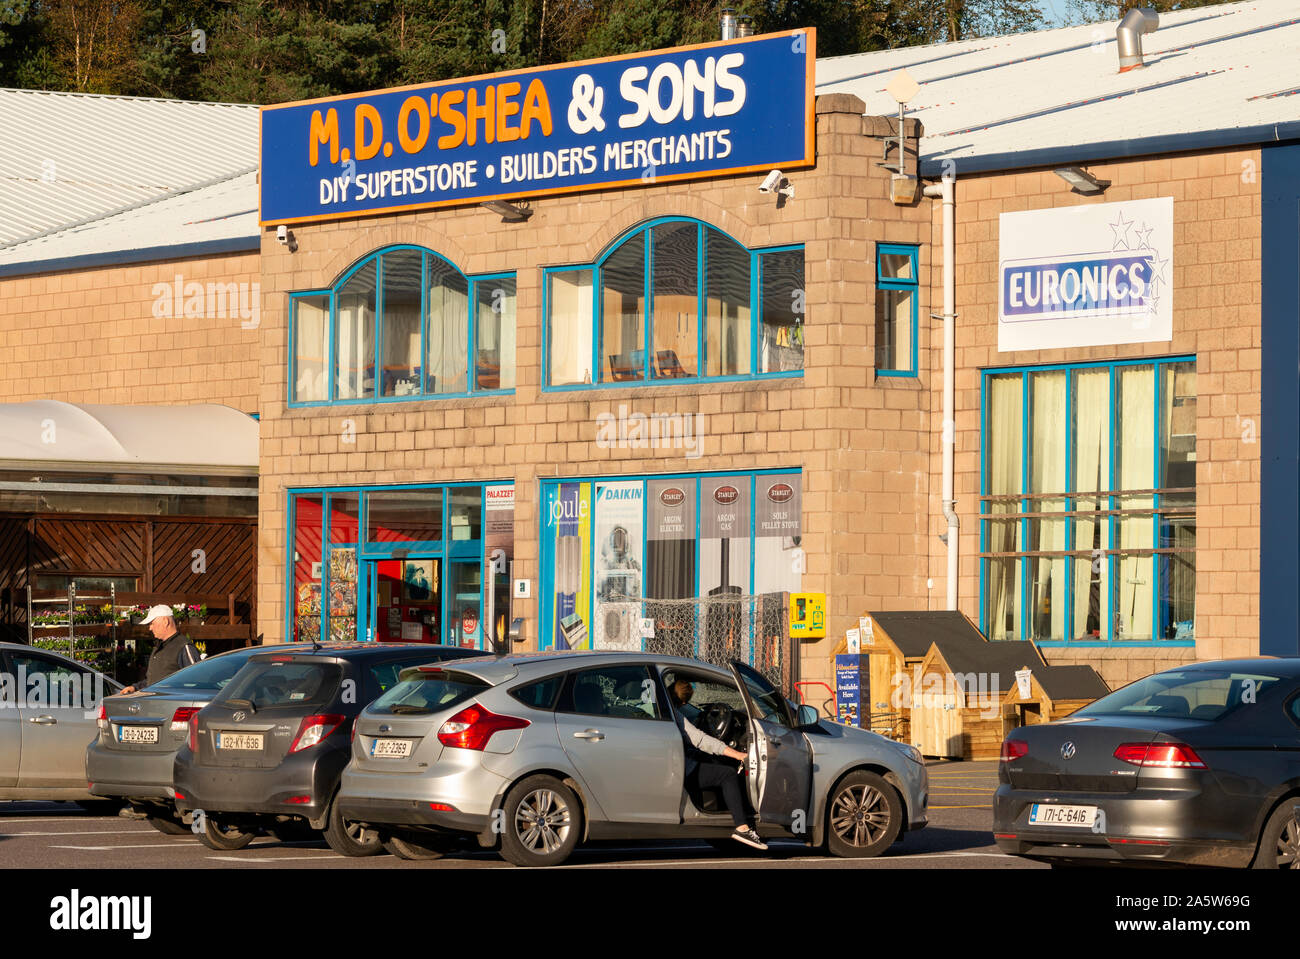 M.D.O'Shea and Sons builders merchants and DIY superstore in Killarney Ireland Stock Photo